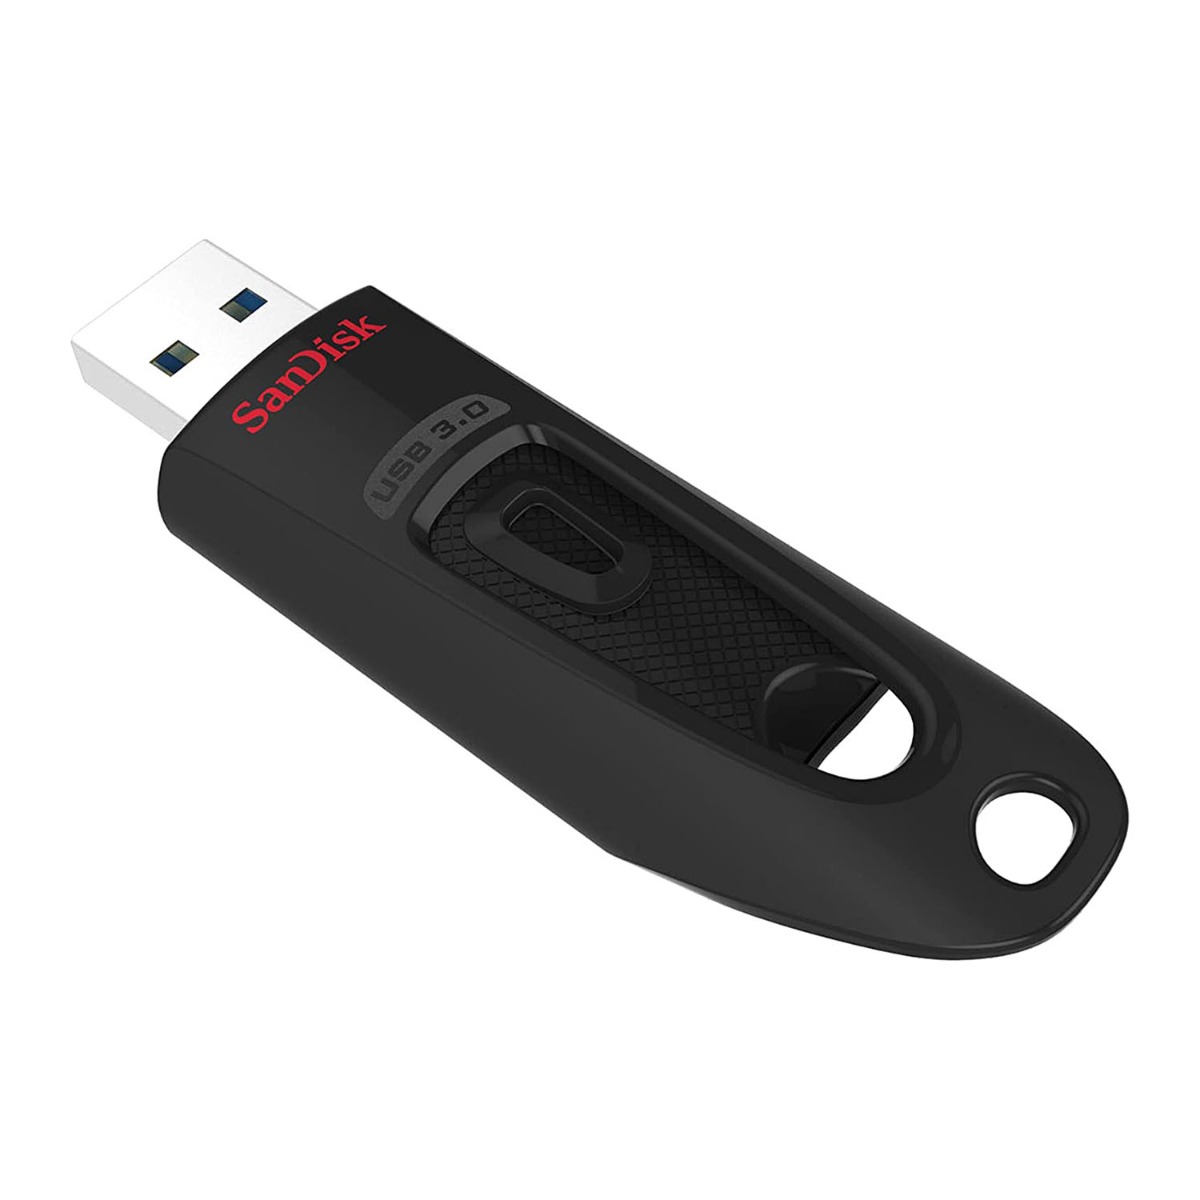 SanDisk Ultra 256 GB, USB 3.0 flash drive, with up to 130 MB/s read speed, Black